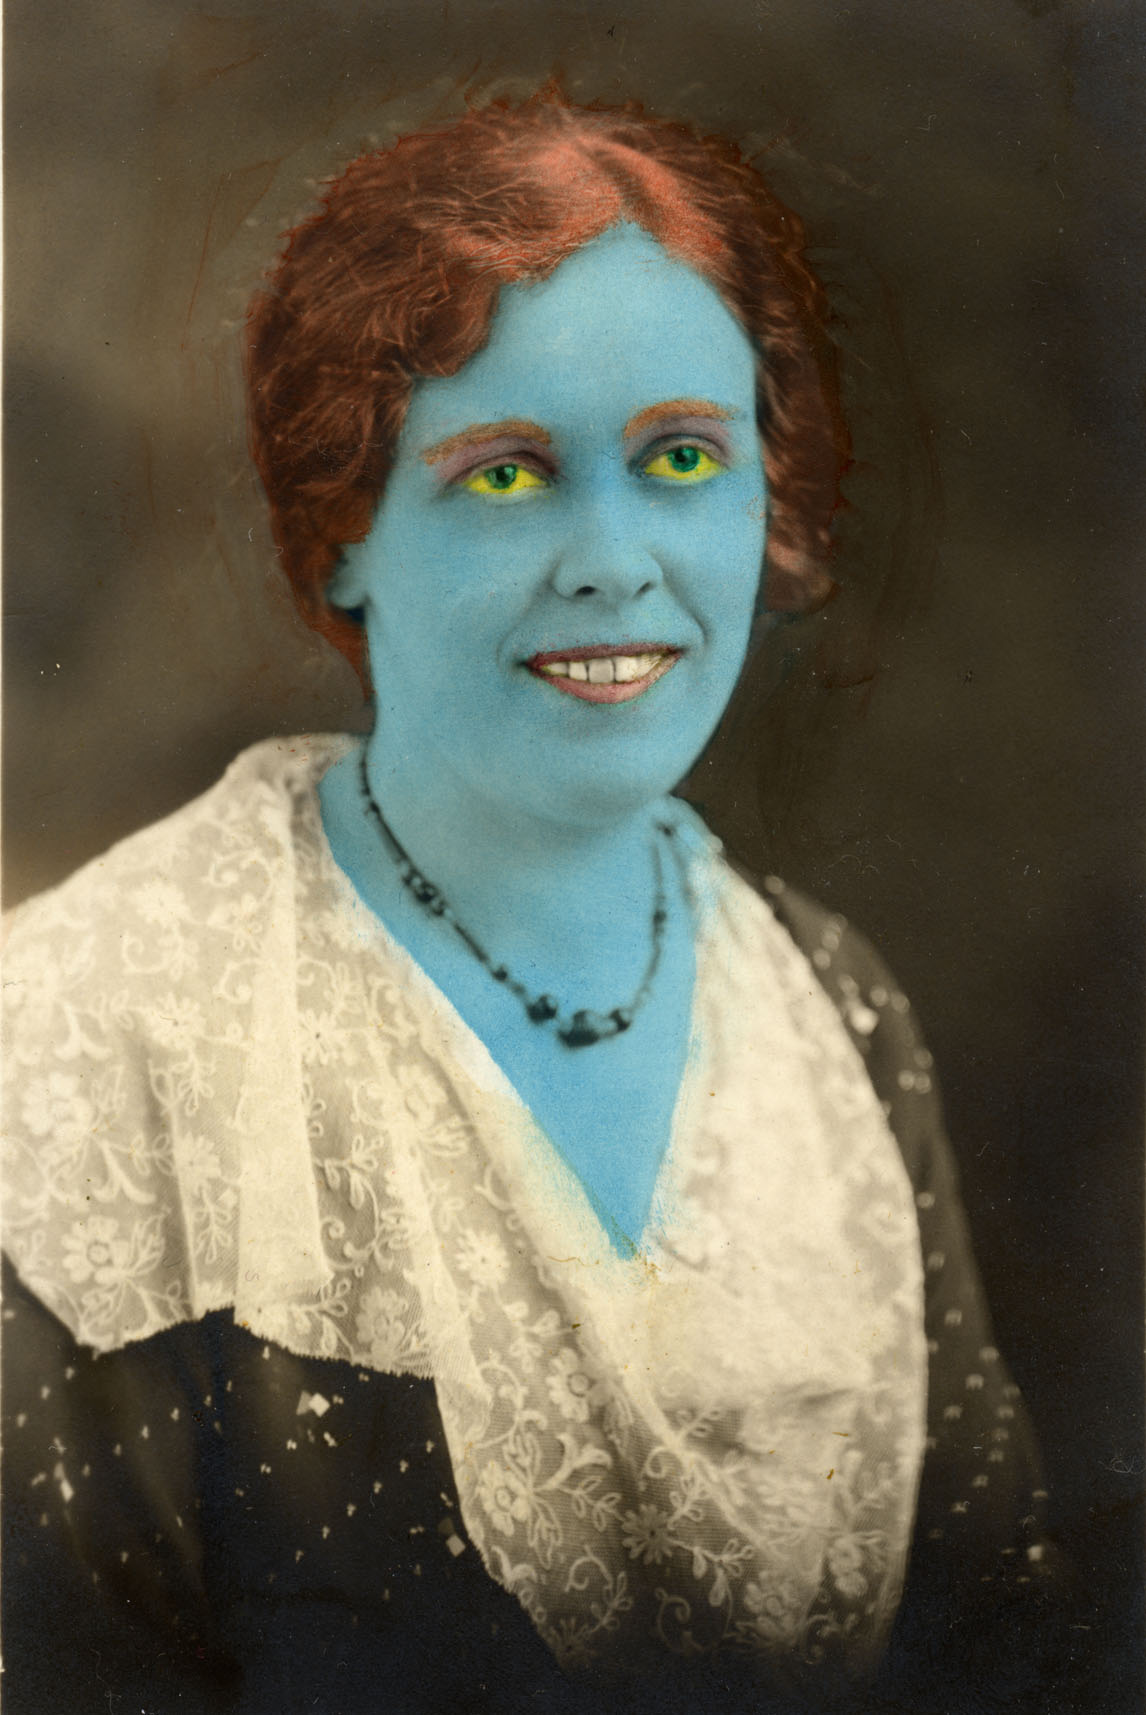 Ghastly Blue Woman in Elegant Dress. Image shot 1910. Exact date unknown.